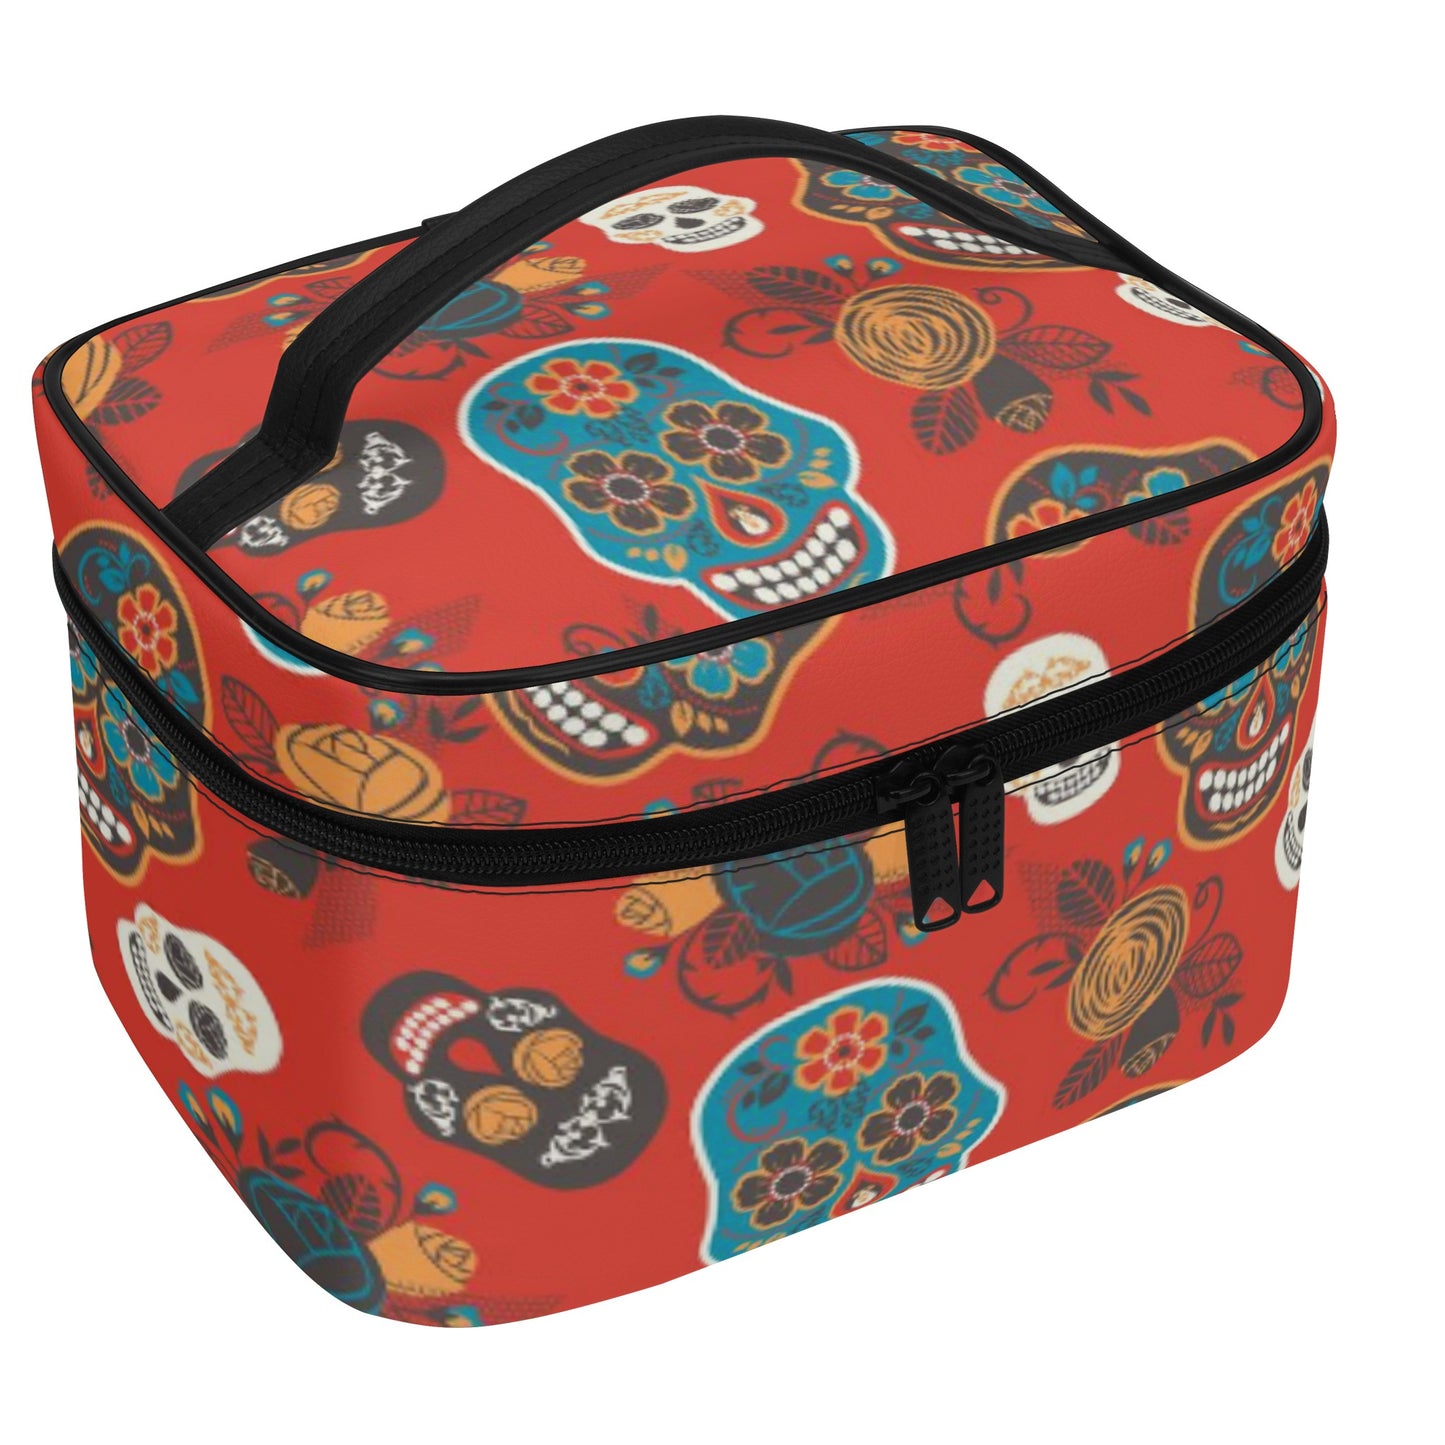 Day of the dead sugar skull All Over Printing Leather Cosmetic Bag